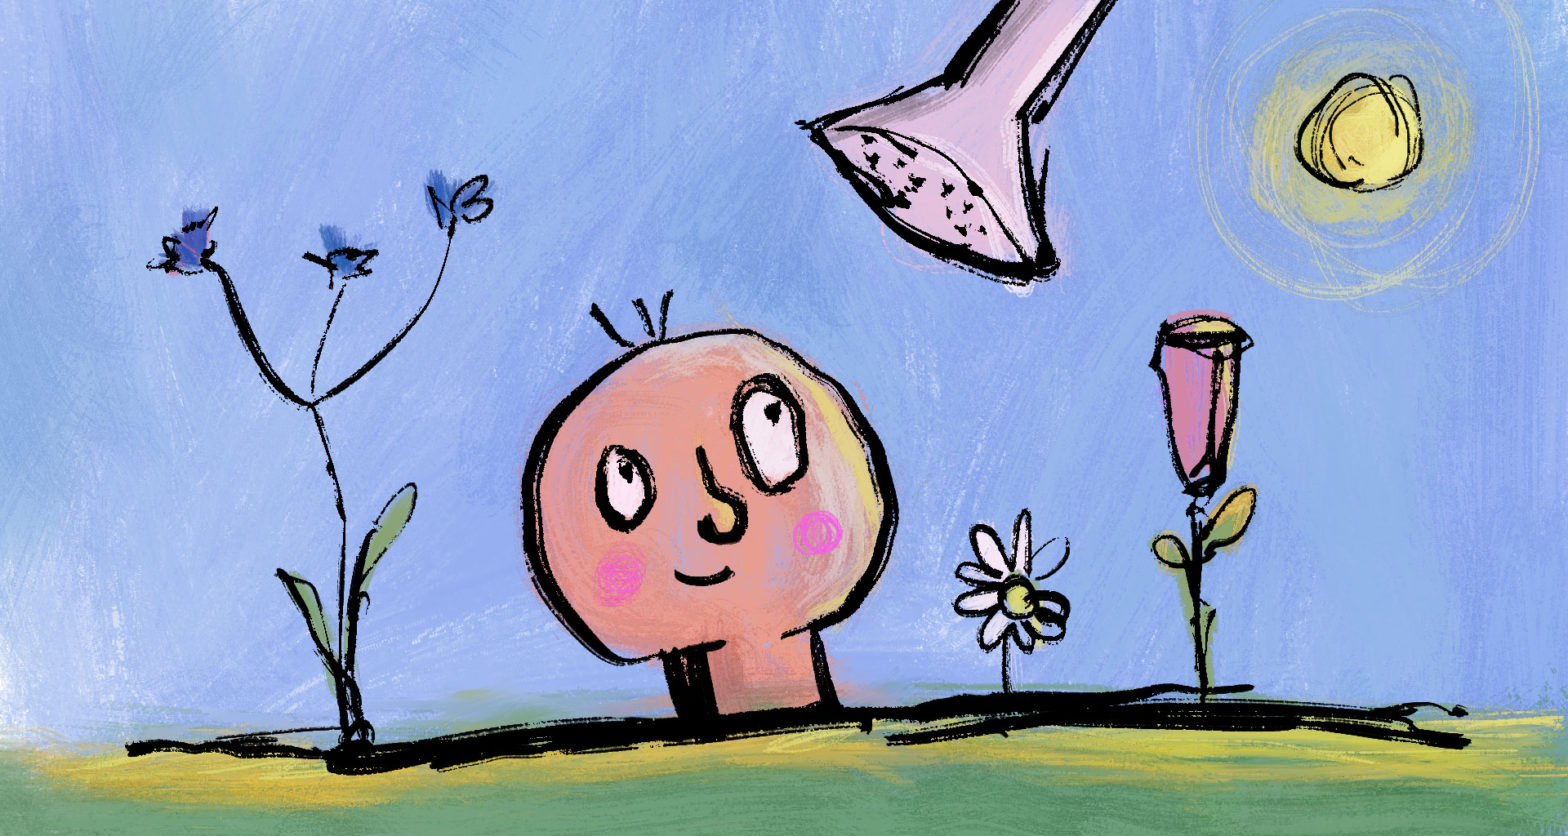 A happy head poking out of the ground, surrounded by flowers, being watered by a watering can